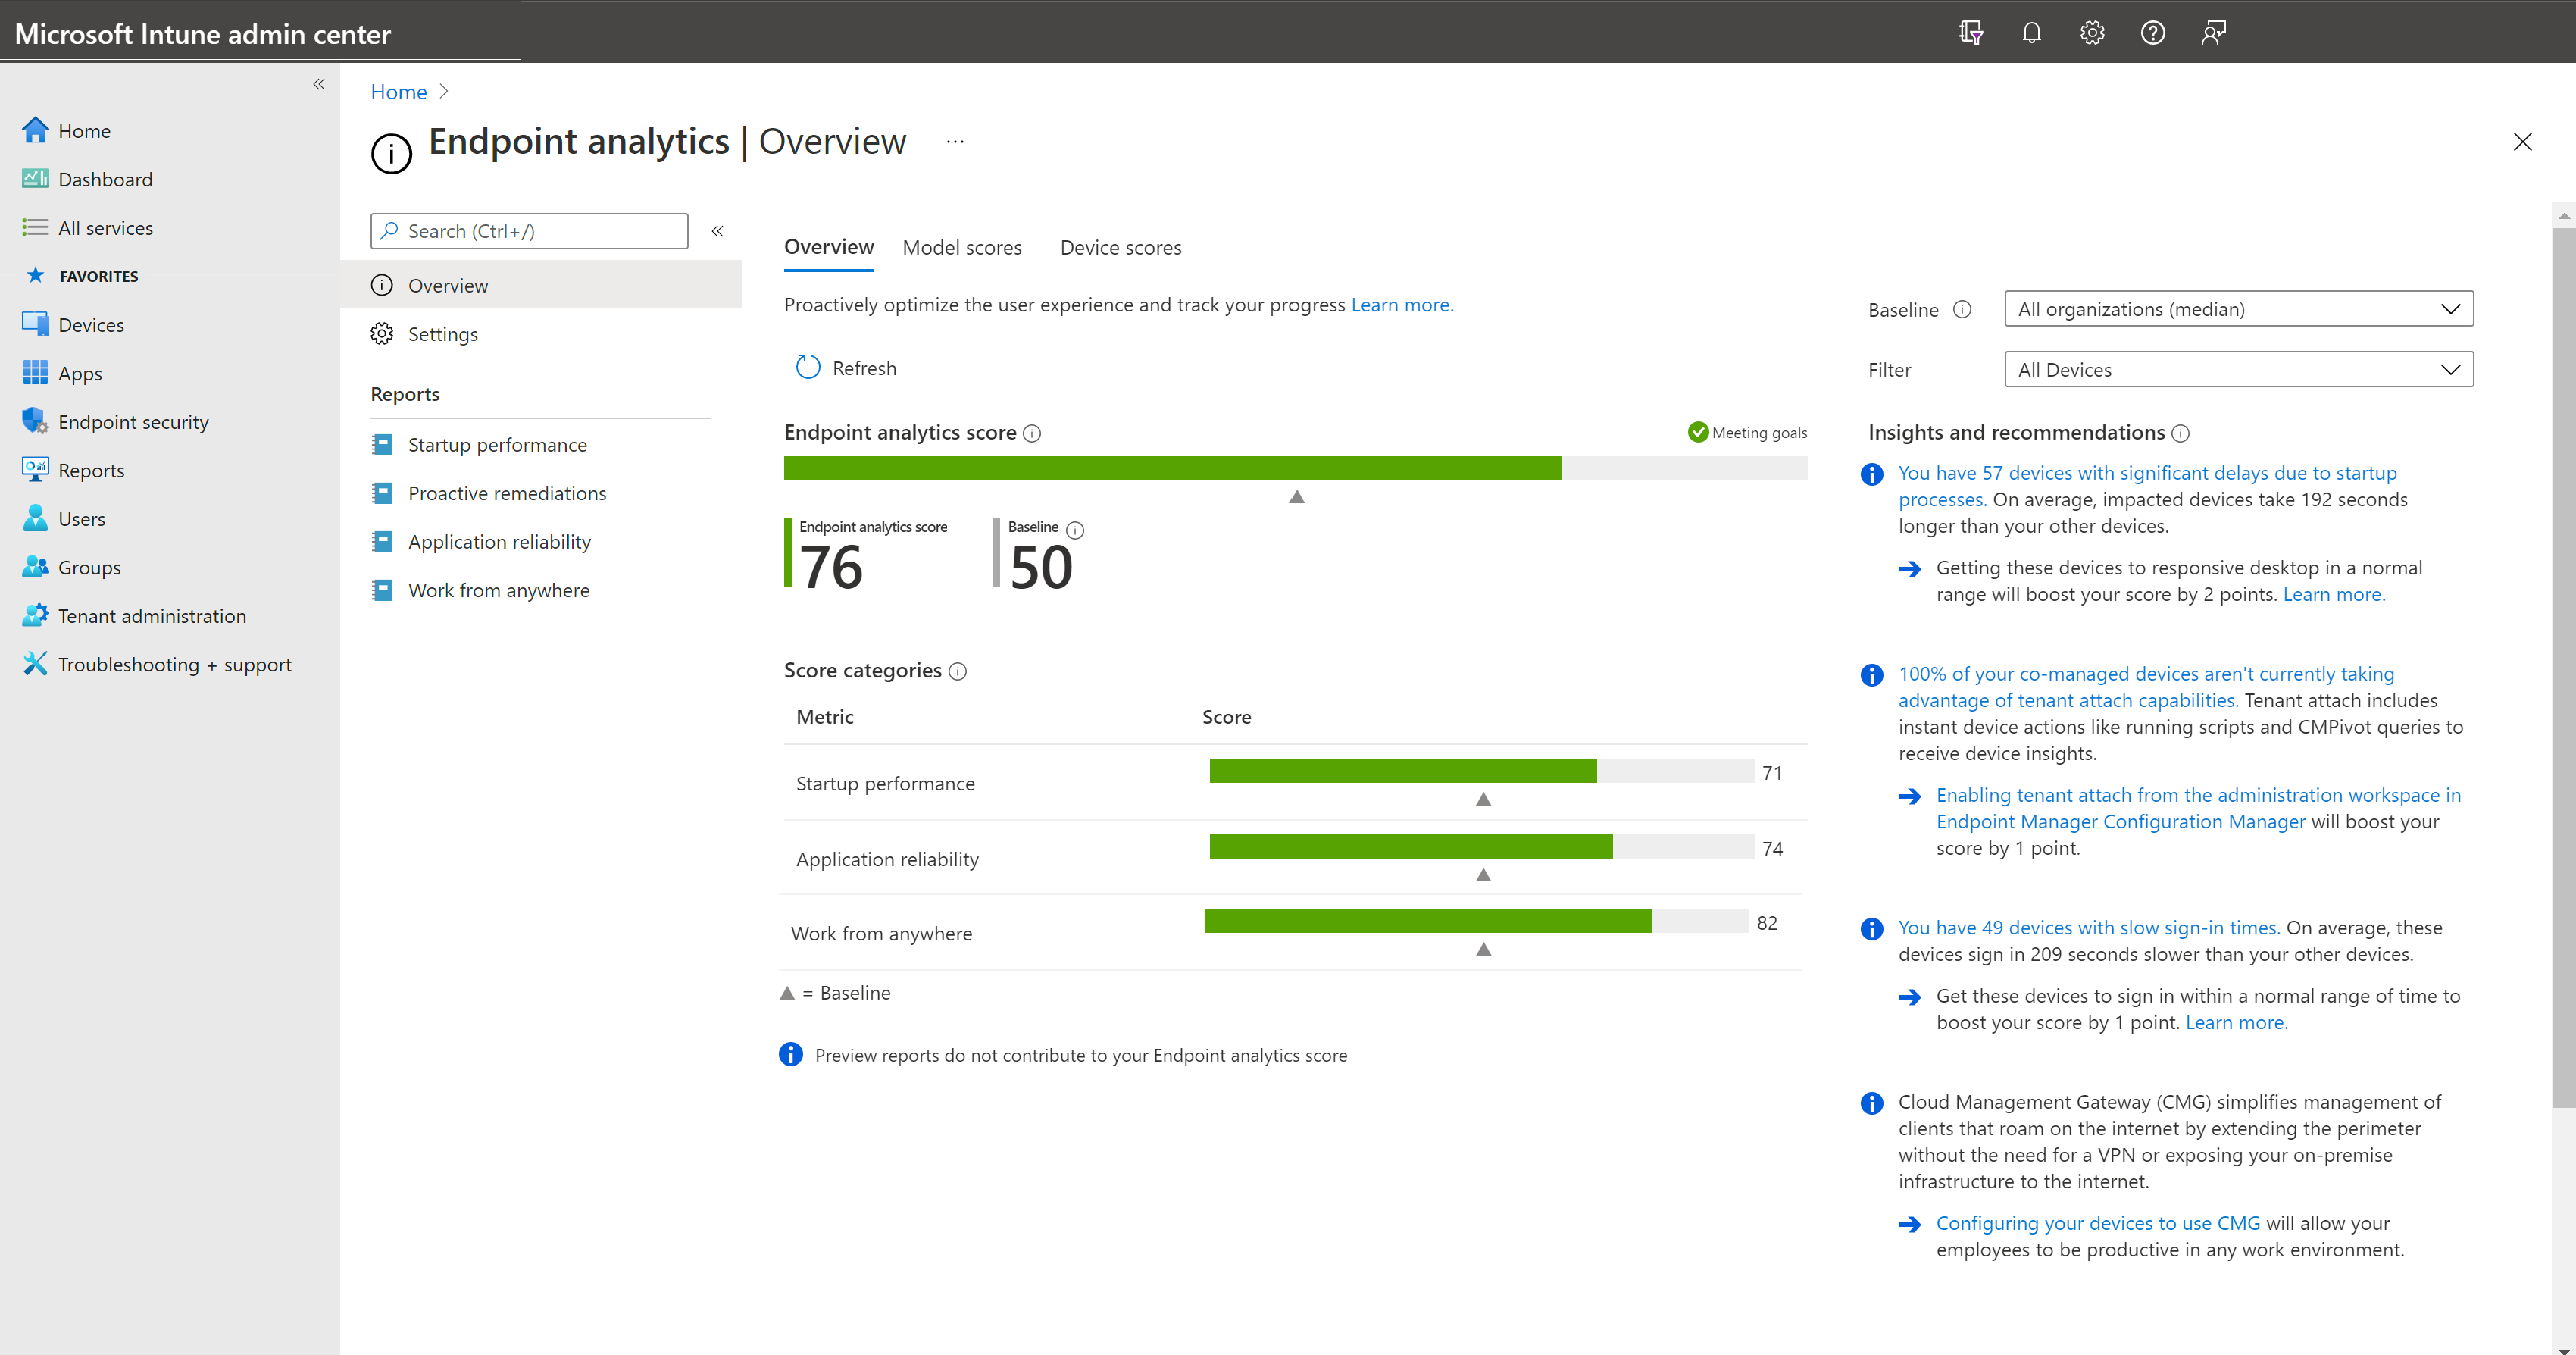 Screenshot of the Endpoint analytics overview page